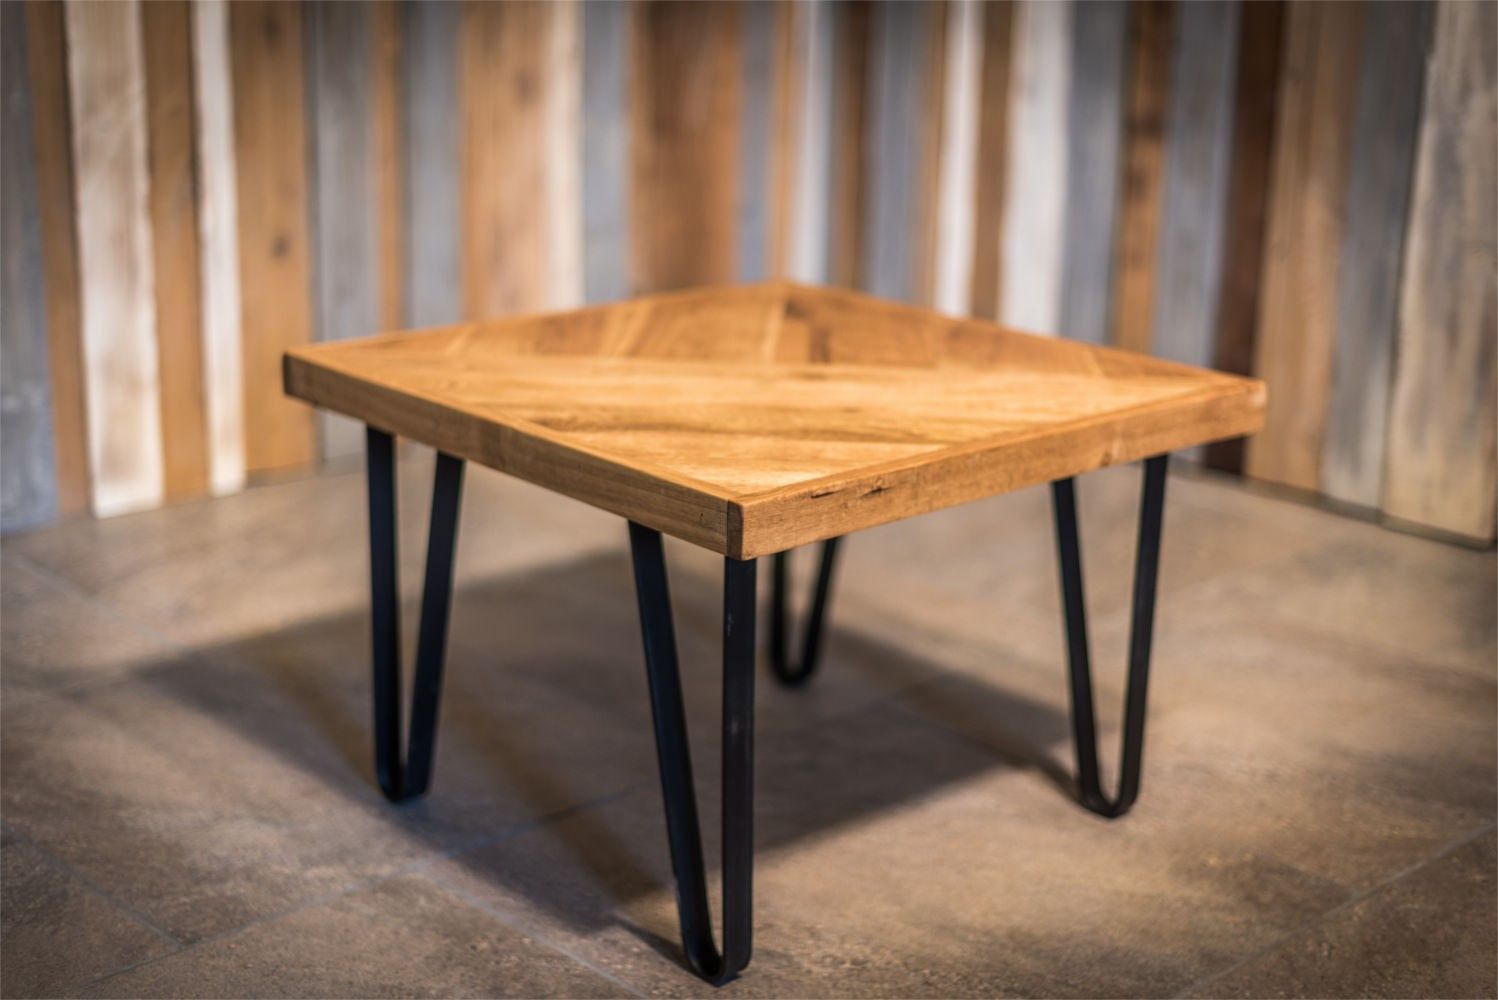 Solid Oak Coffee Table With Steel Legs | Solid Oak Designs In Coffee Tables With Solid Legs (View 10 of 15)